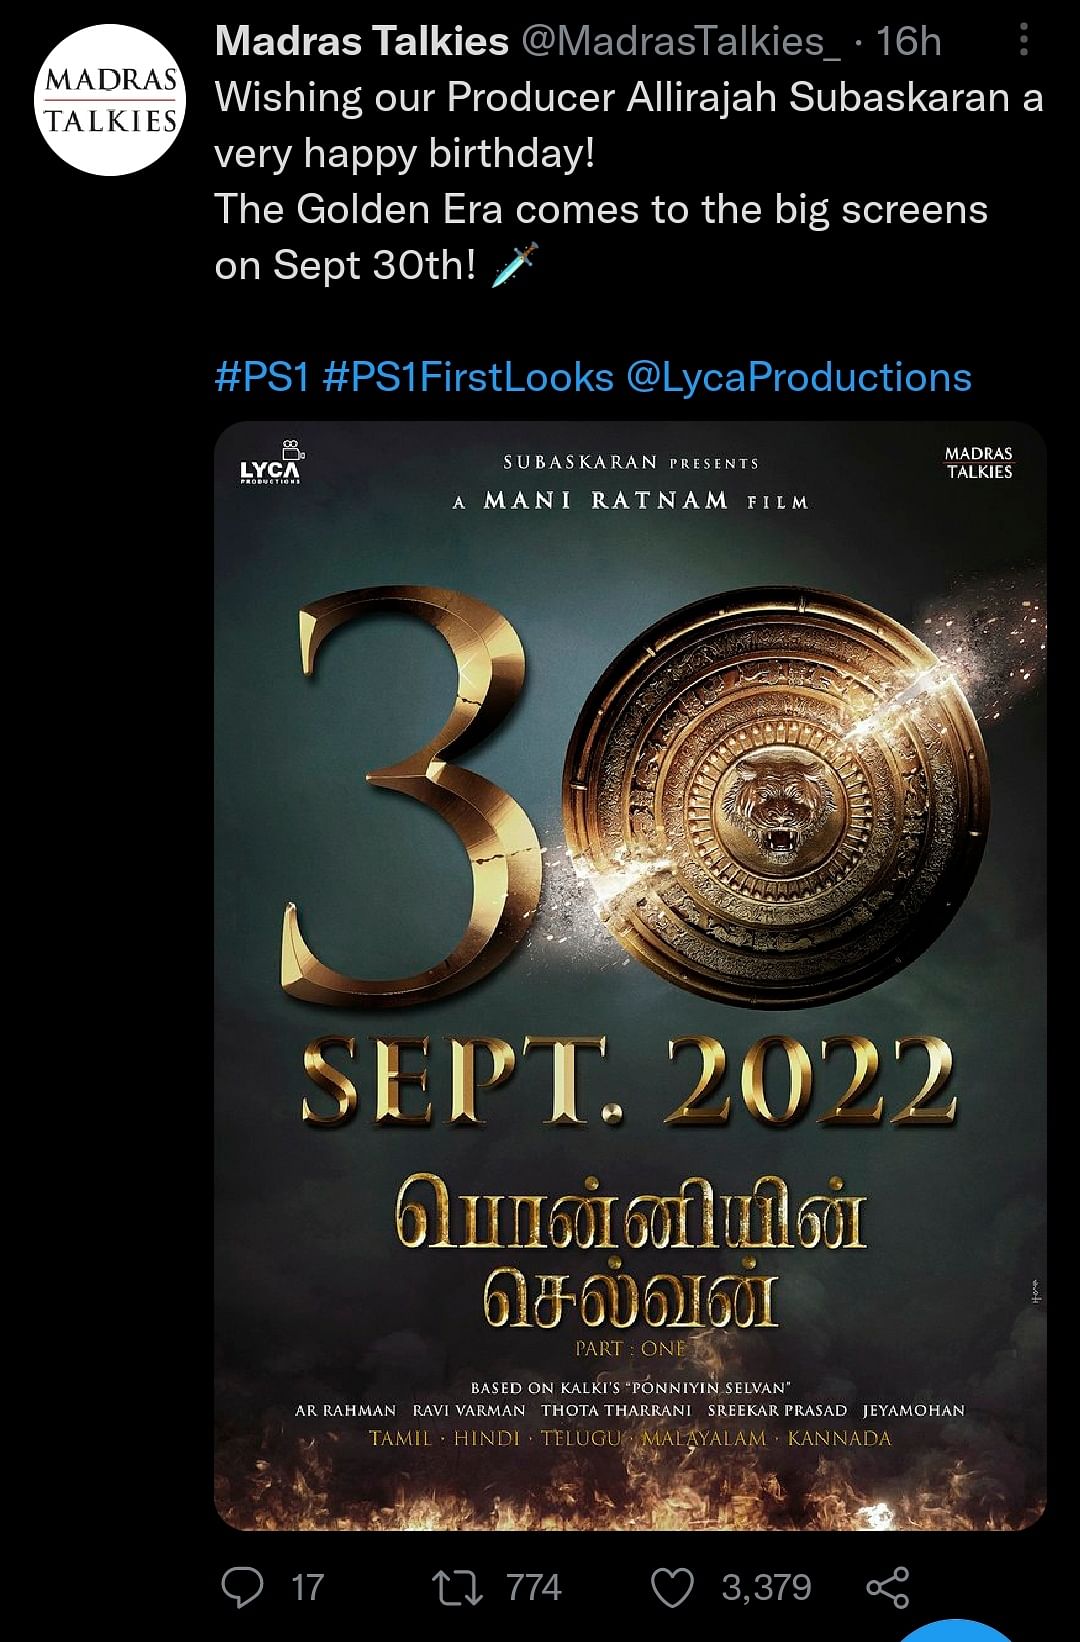 'Ponniyin Selvan', directed by Mani Ratnam, wil be released in two parts.